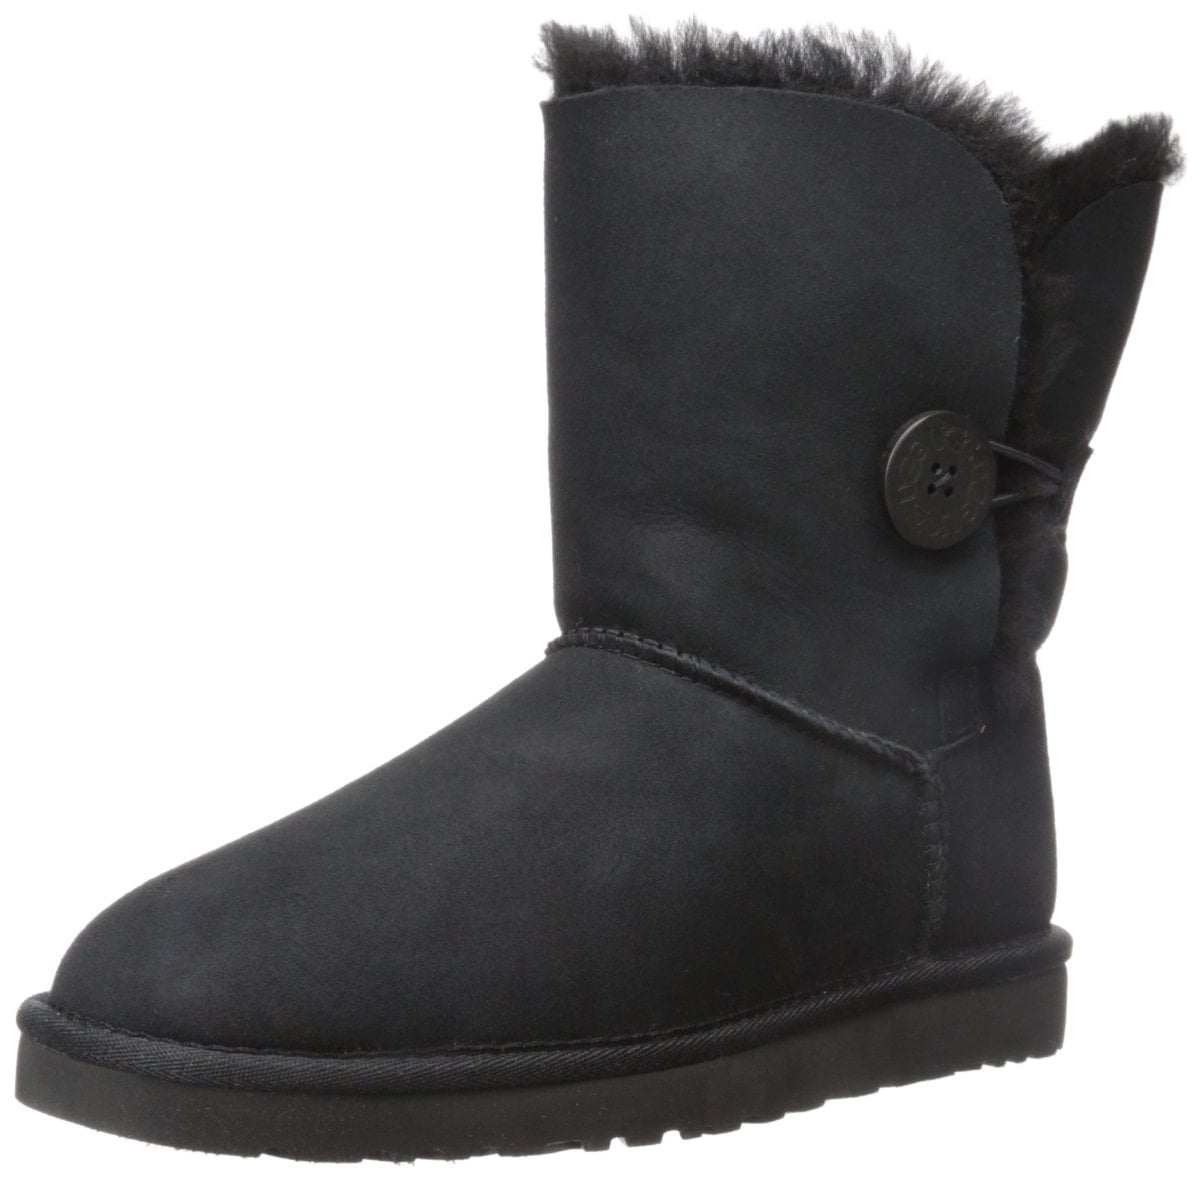 best price on womens ugg boots